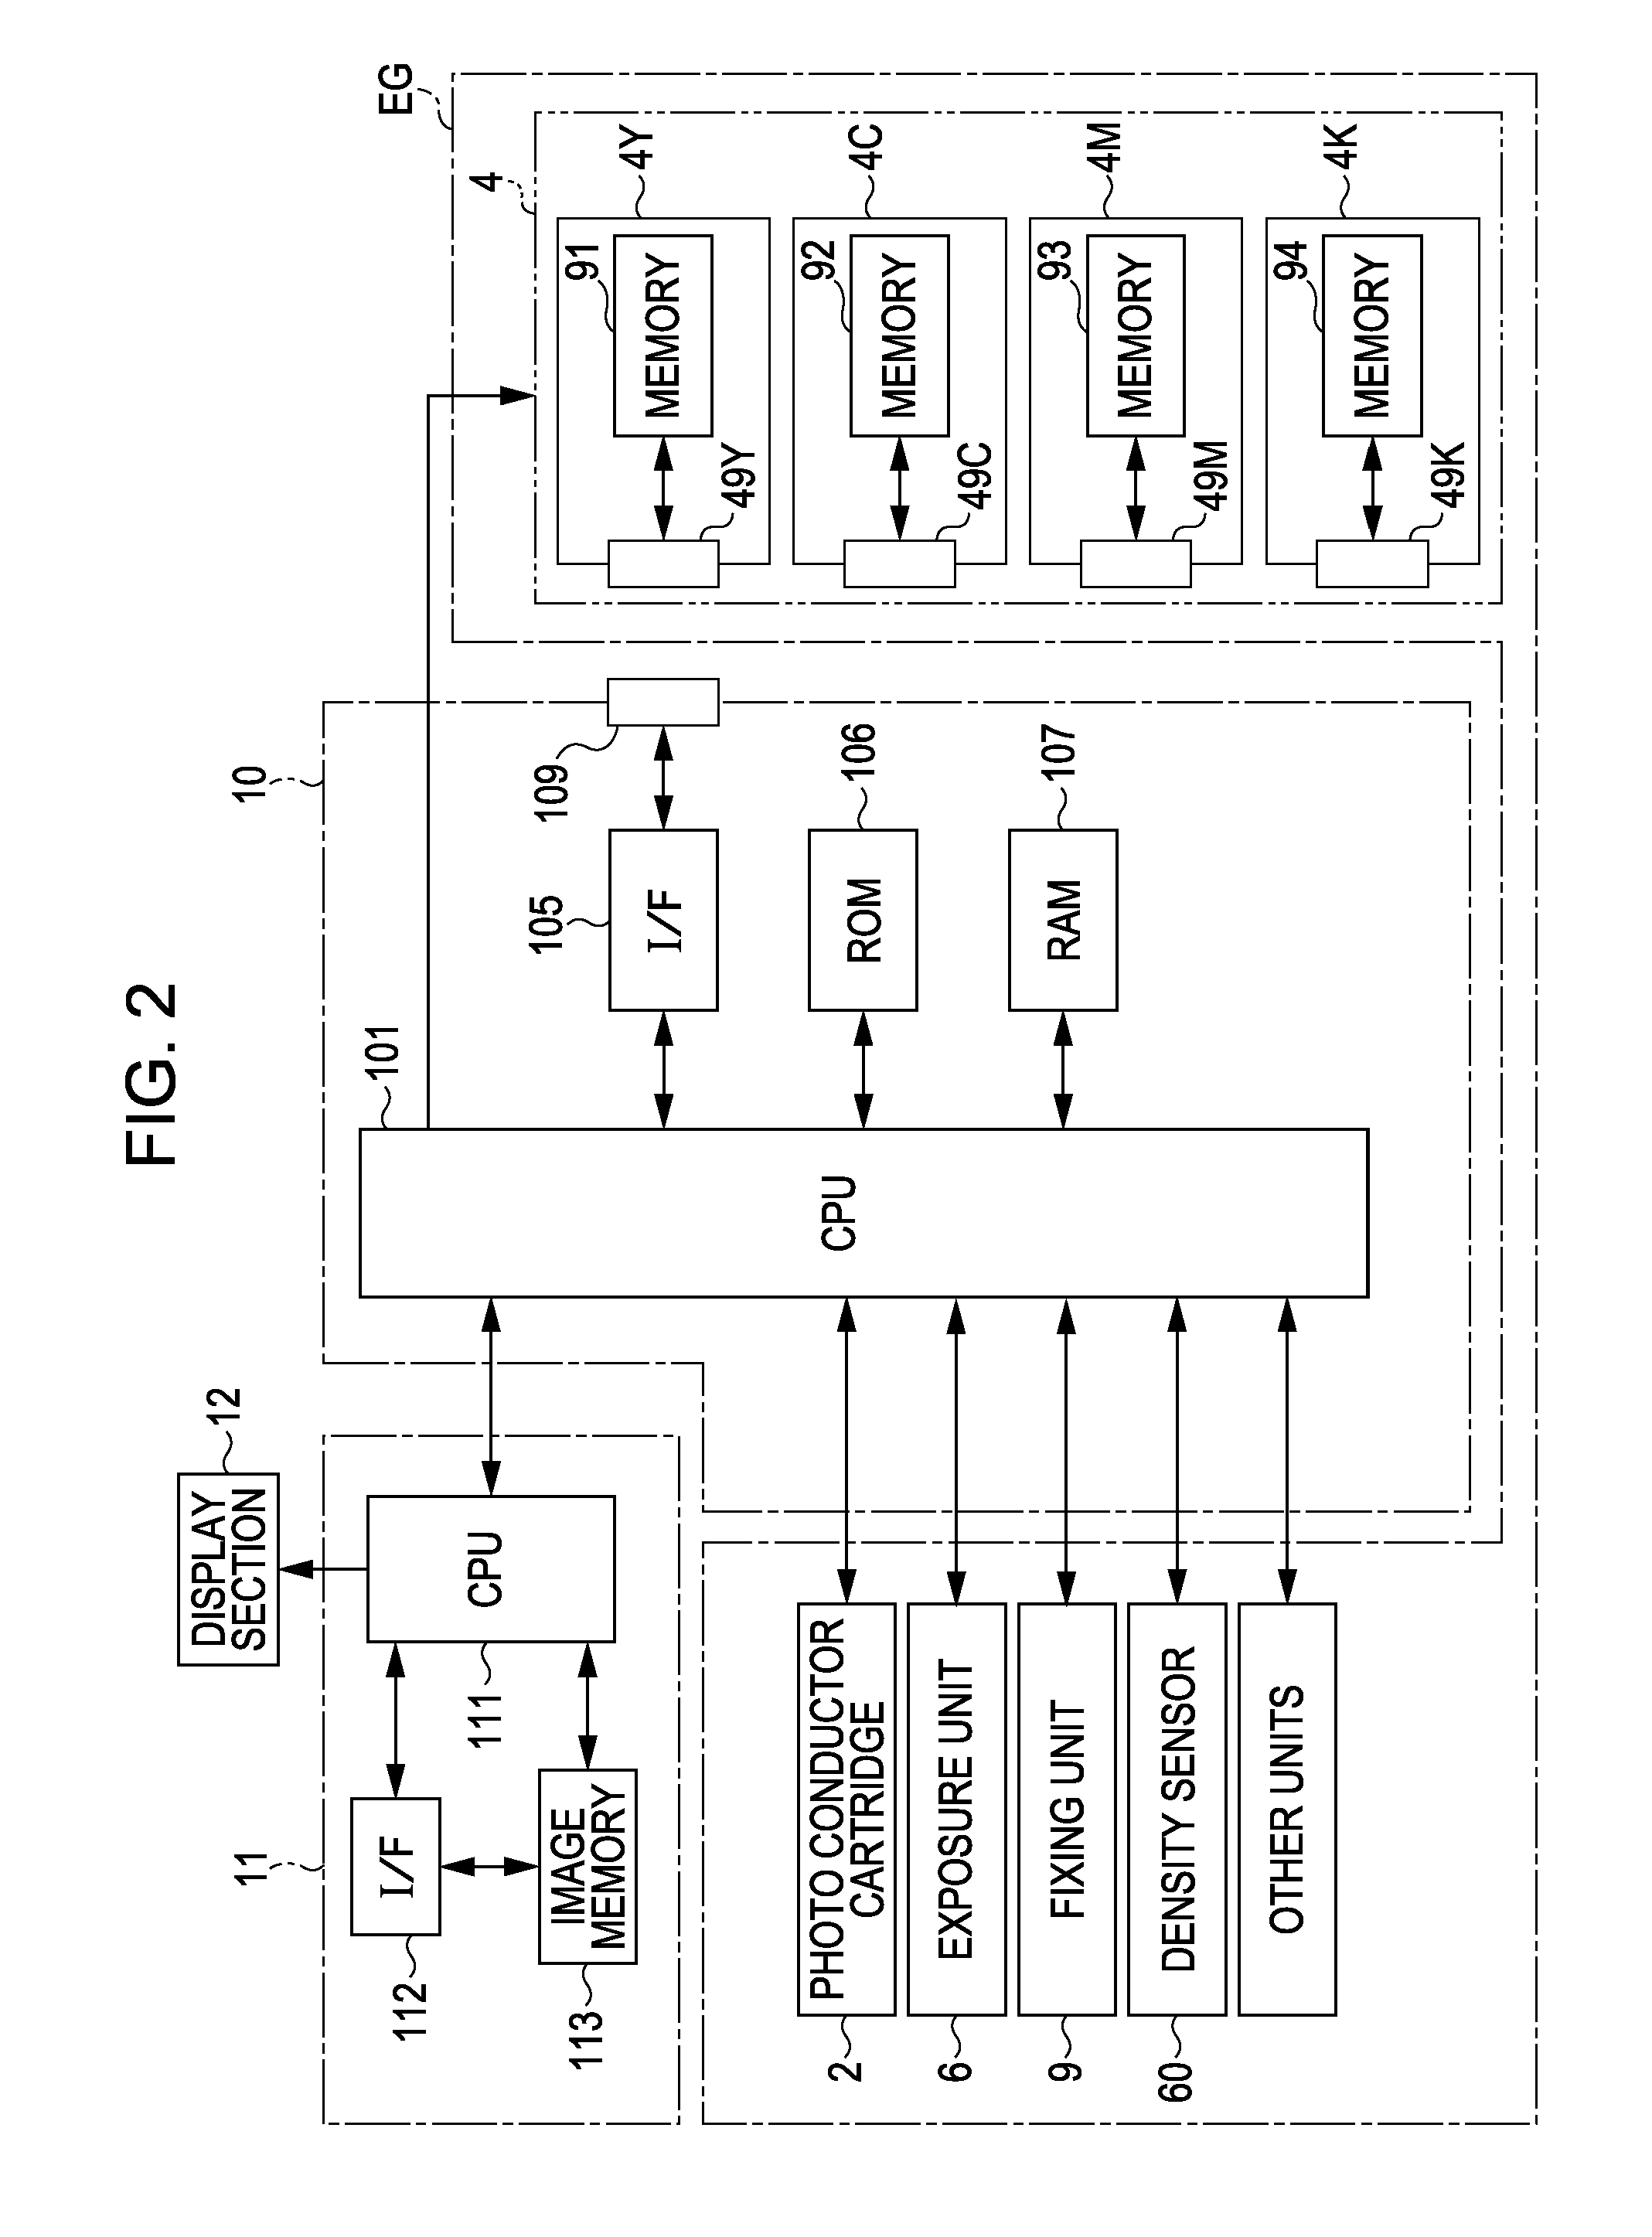 Developing apparatus, image forming apparatus, image forming method, and toner